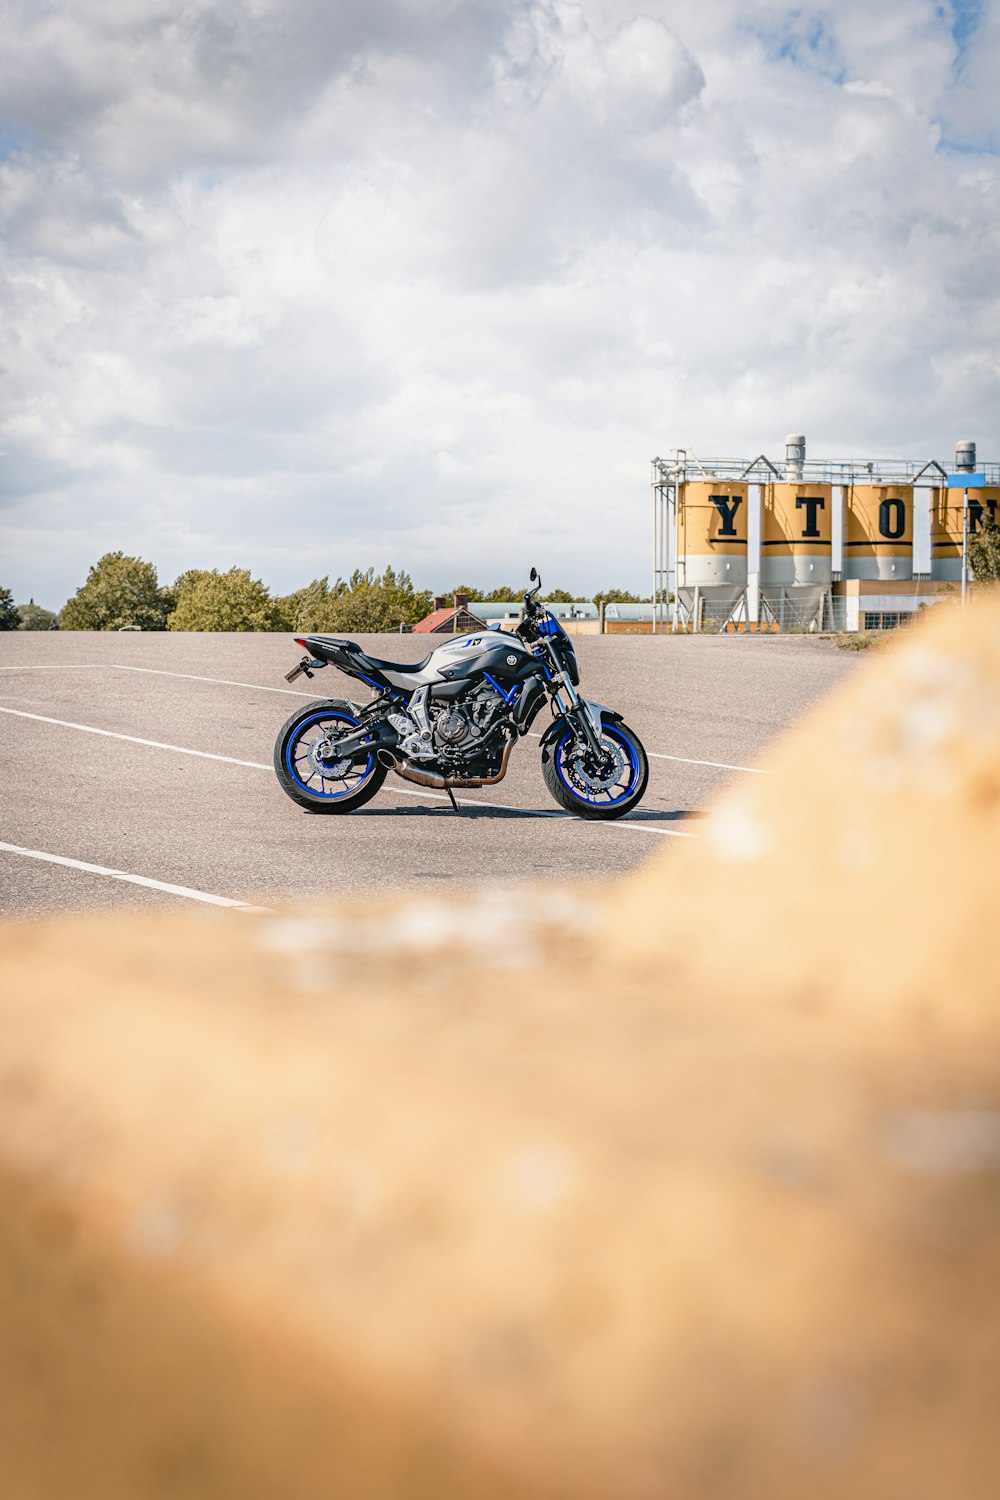 black and blue sports bike on road during daytime